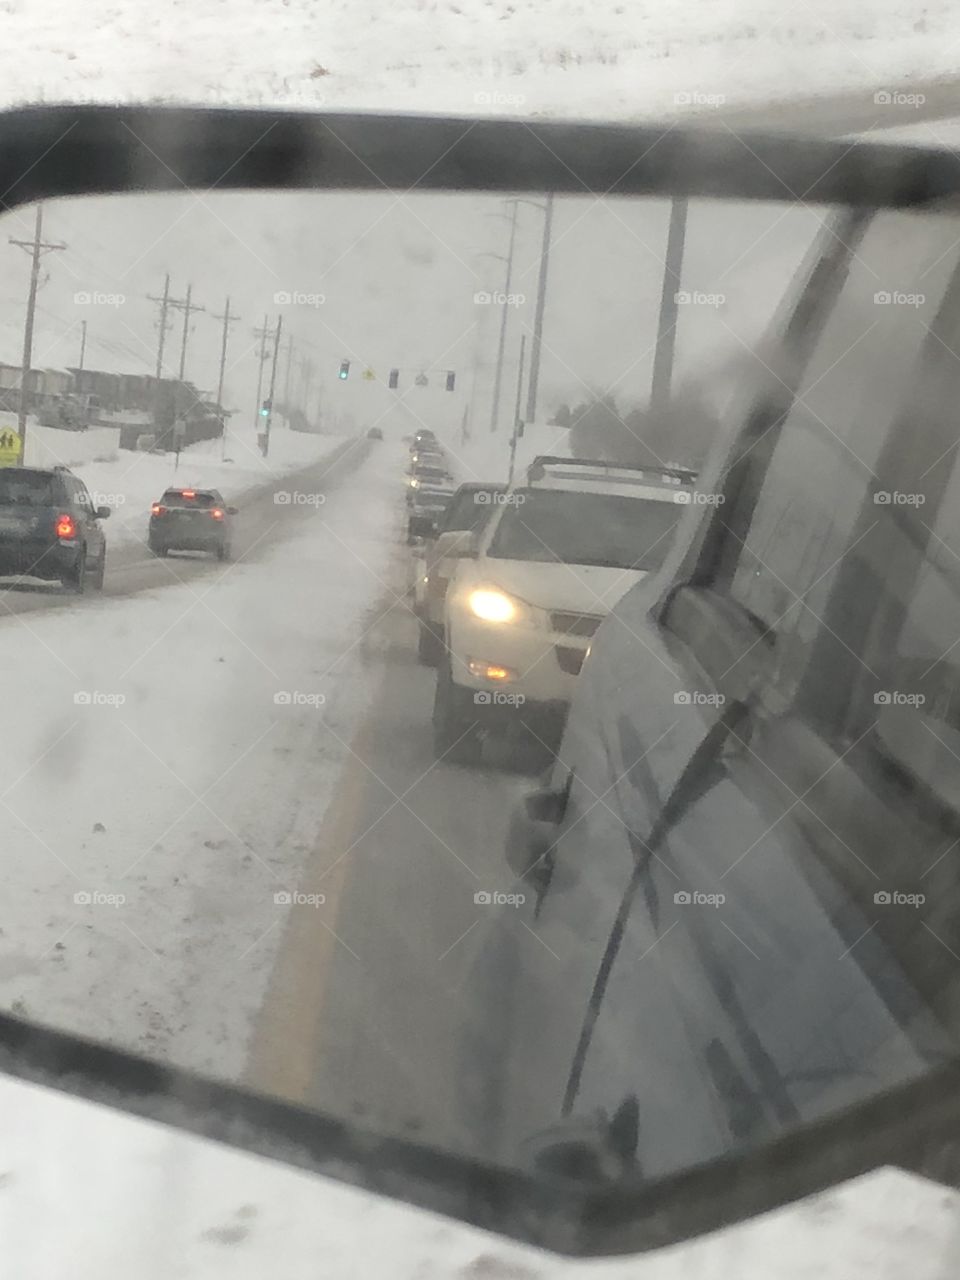 Painful drive in winter traffic 